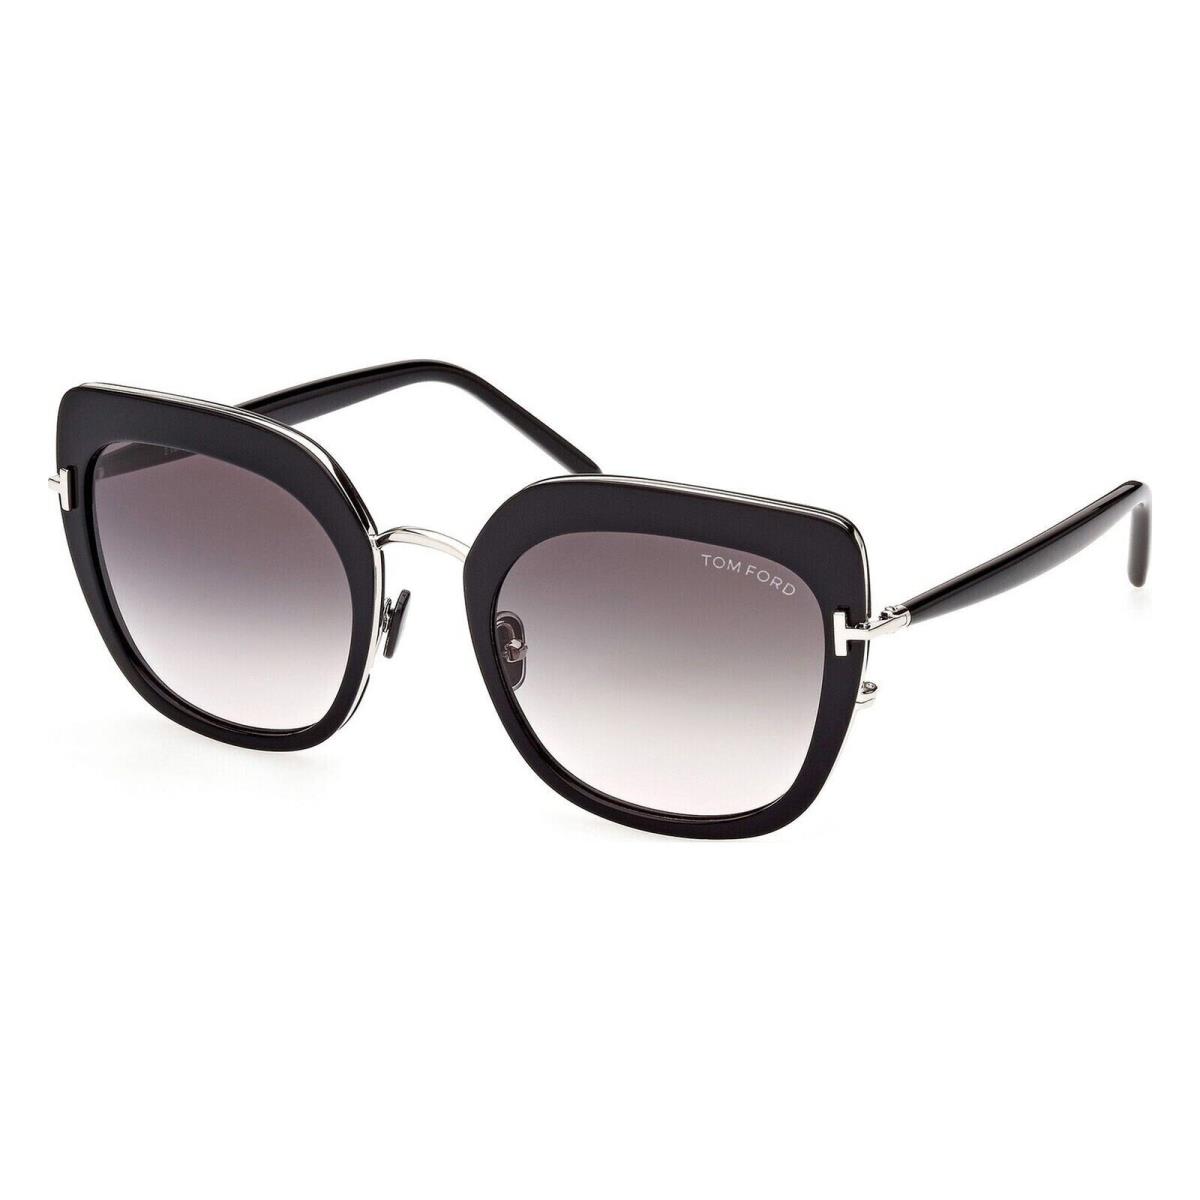 Tom Ford FT0945-05B-55 Black/other / Gradient Smoke